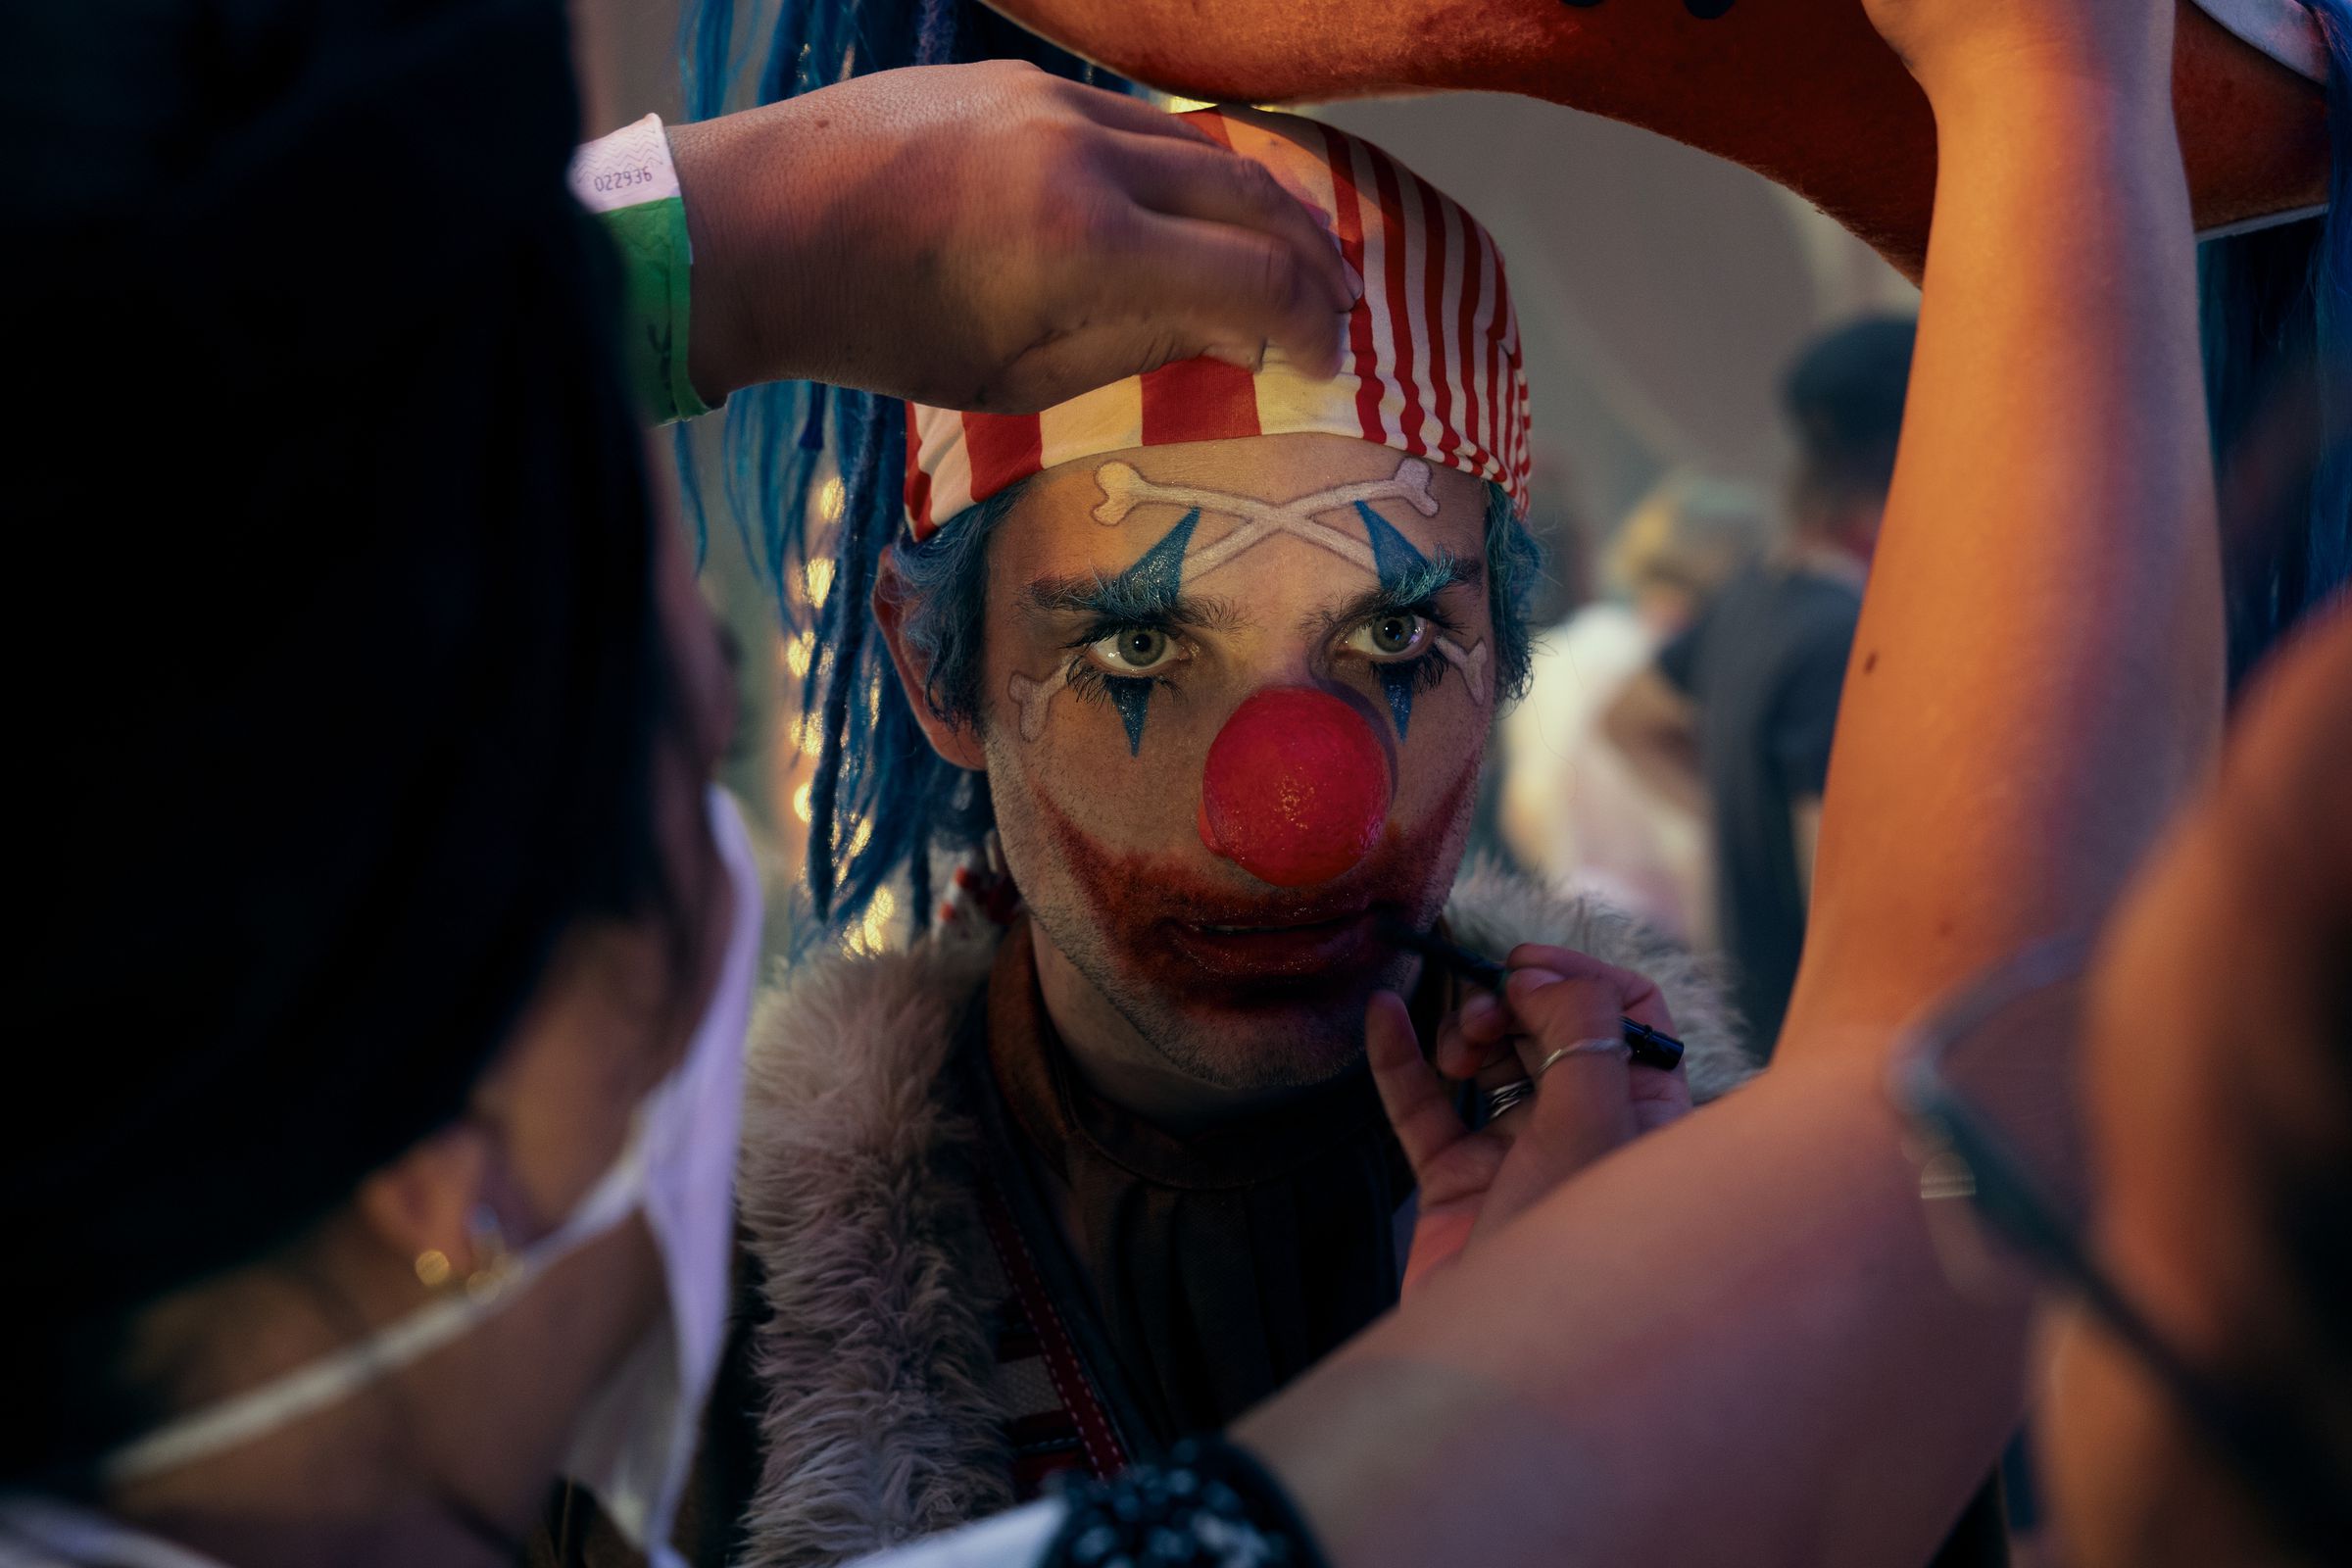 A close-up shop of an actor made up to look like a clown as production workers fine-tune his makeup in between shoots.